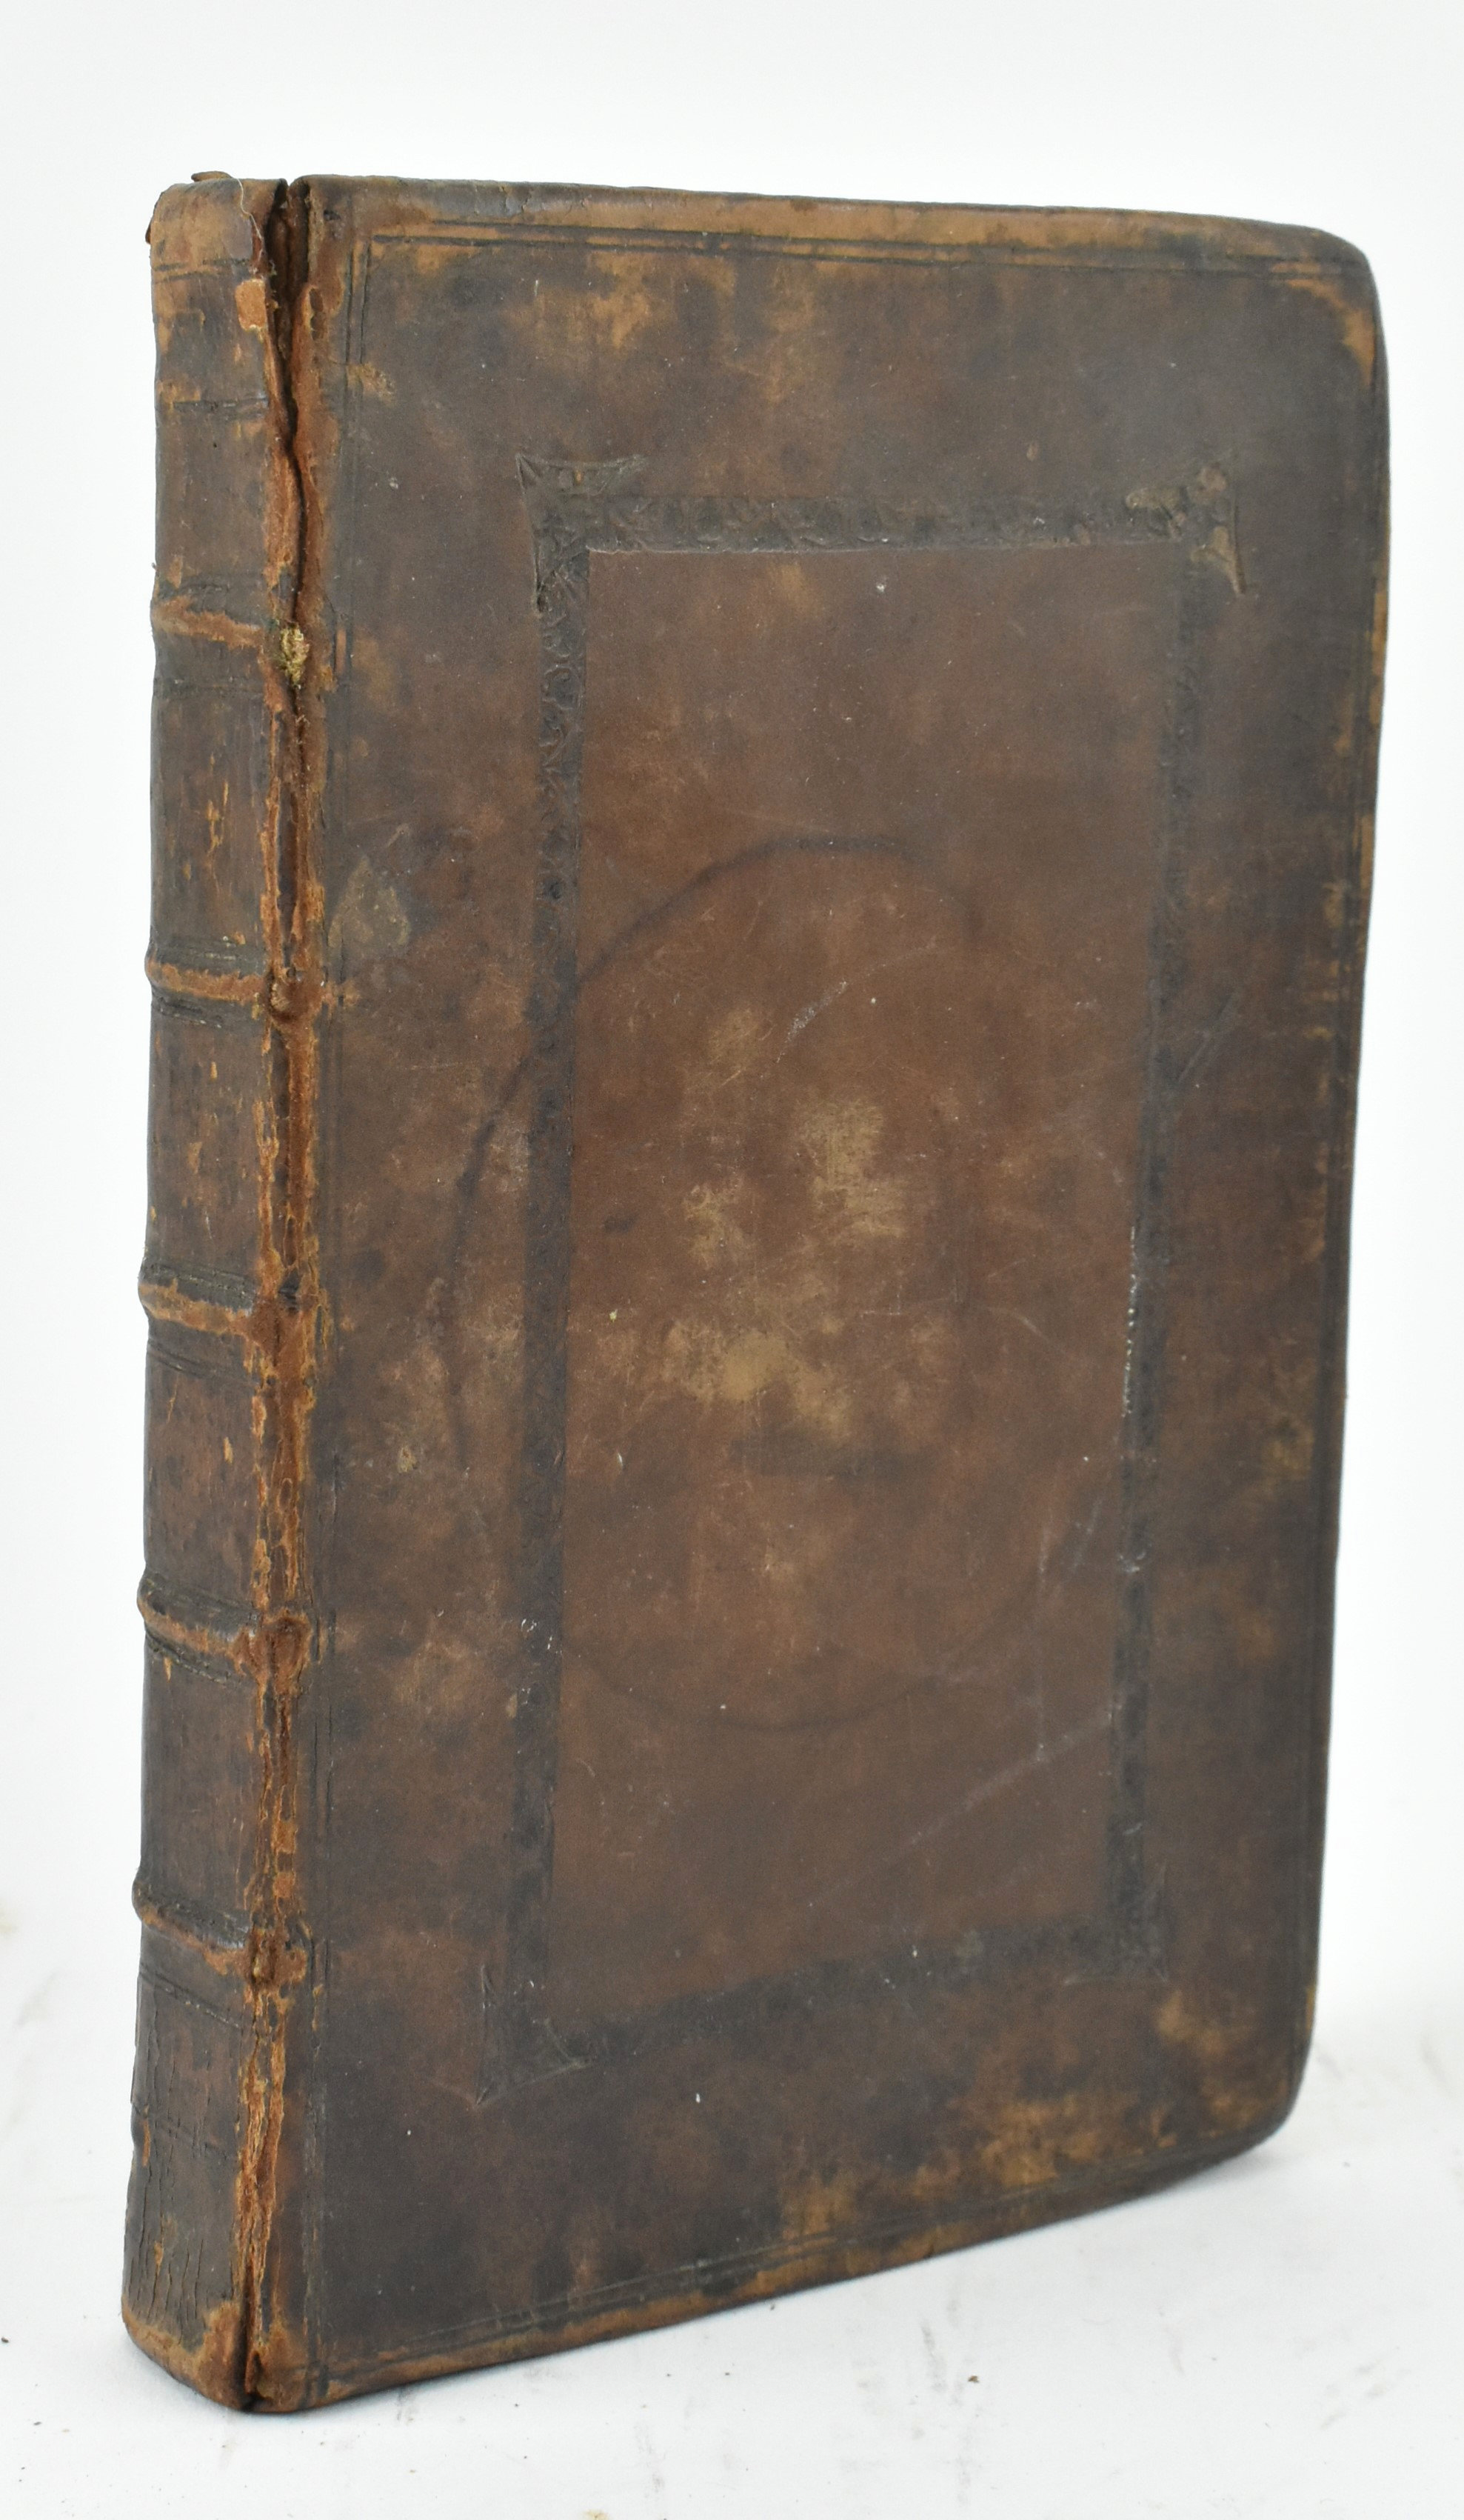 BEVERIDGE, WILLIAM. 1709 PRIVATE THOUGHTS UPON RELIGION